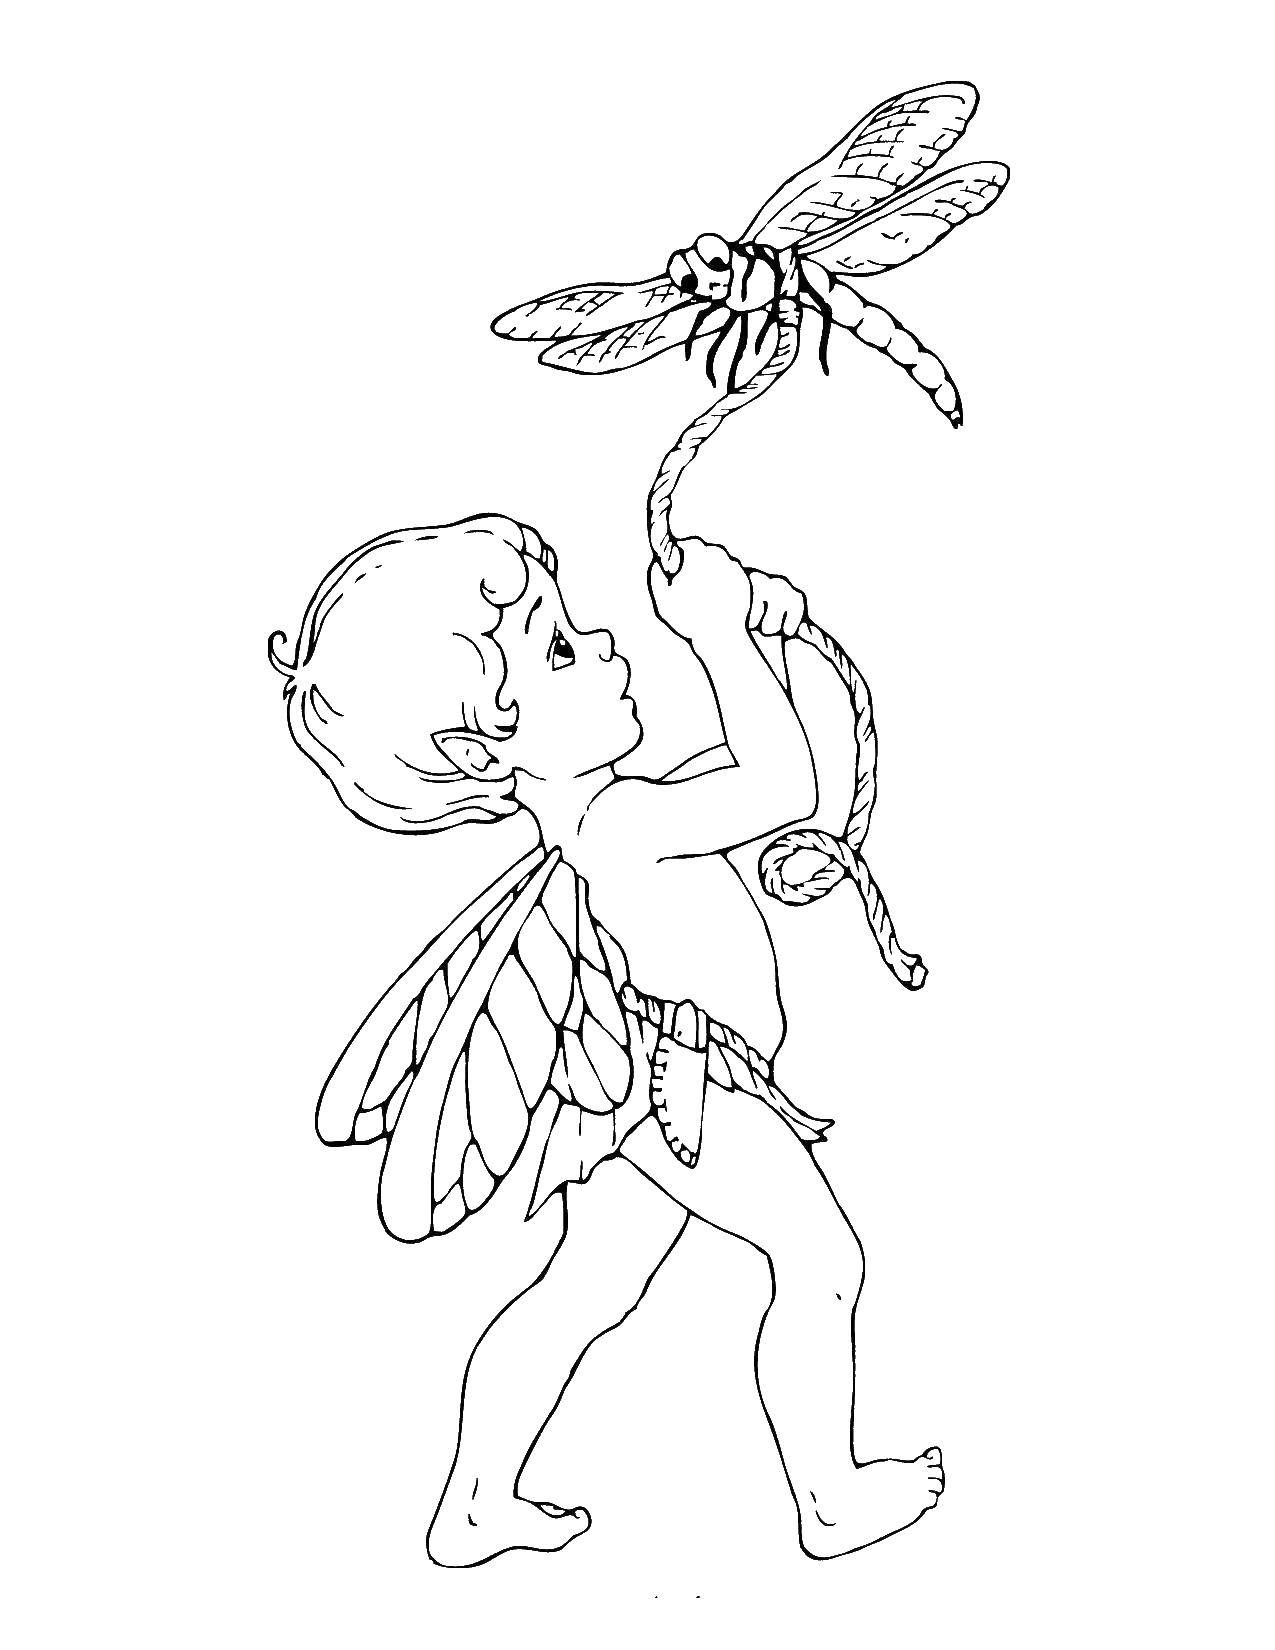 Coloring Boy fairy. Category Fantasy. Tags:  fairy, boy, wings.